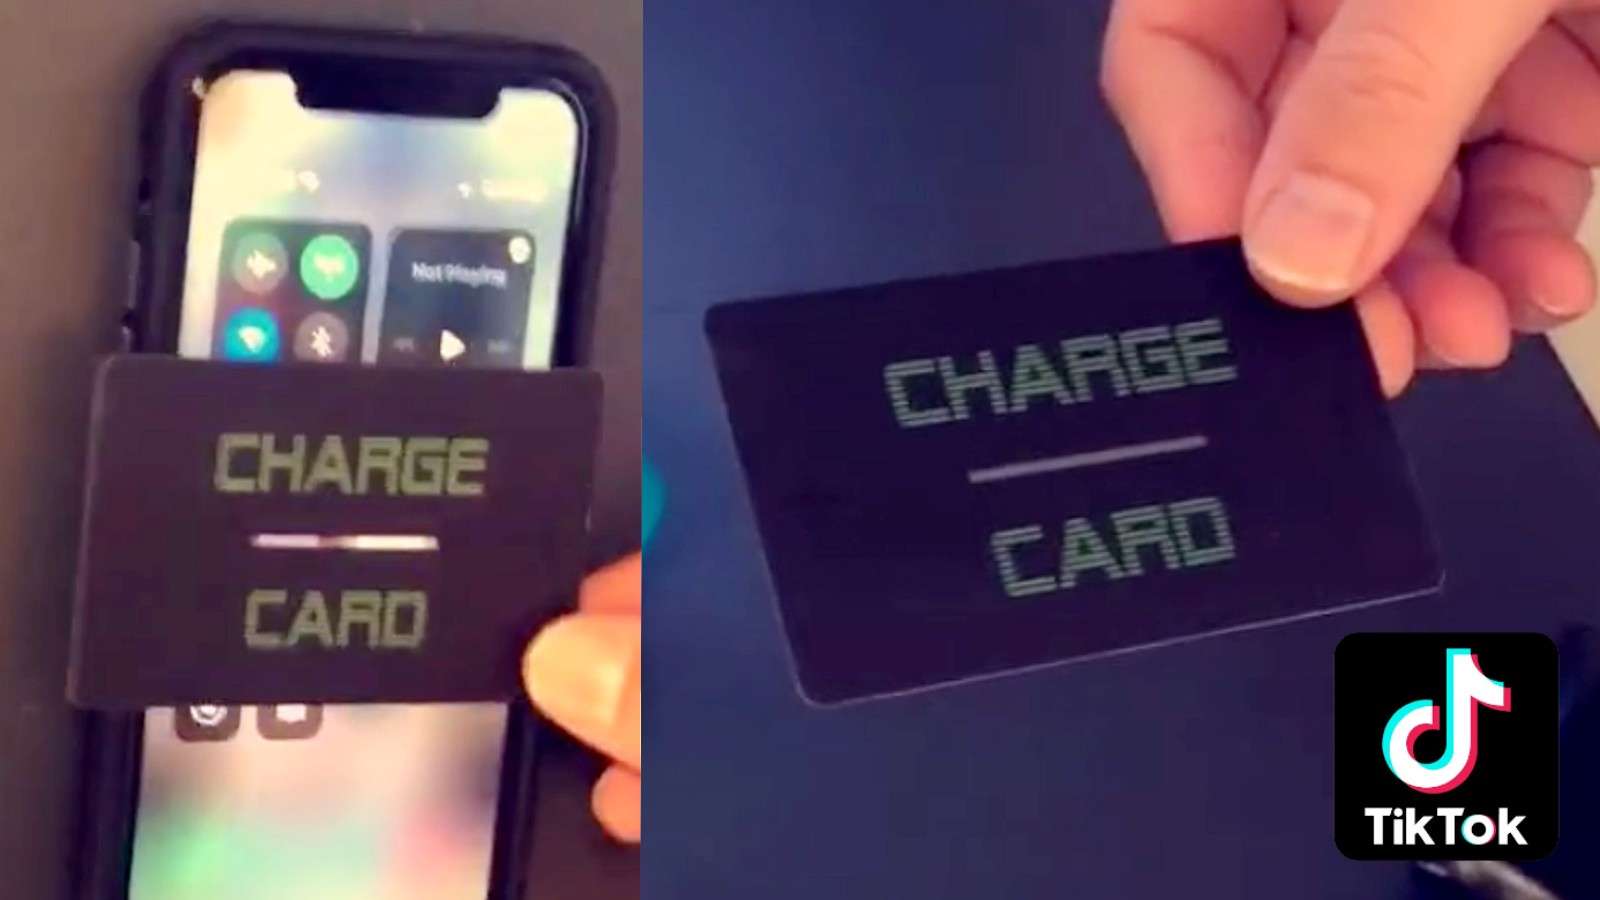 TikTok 'Charge Card' pressed against a phone